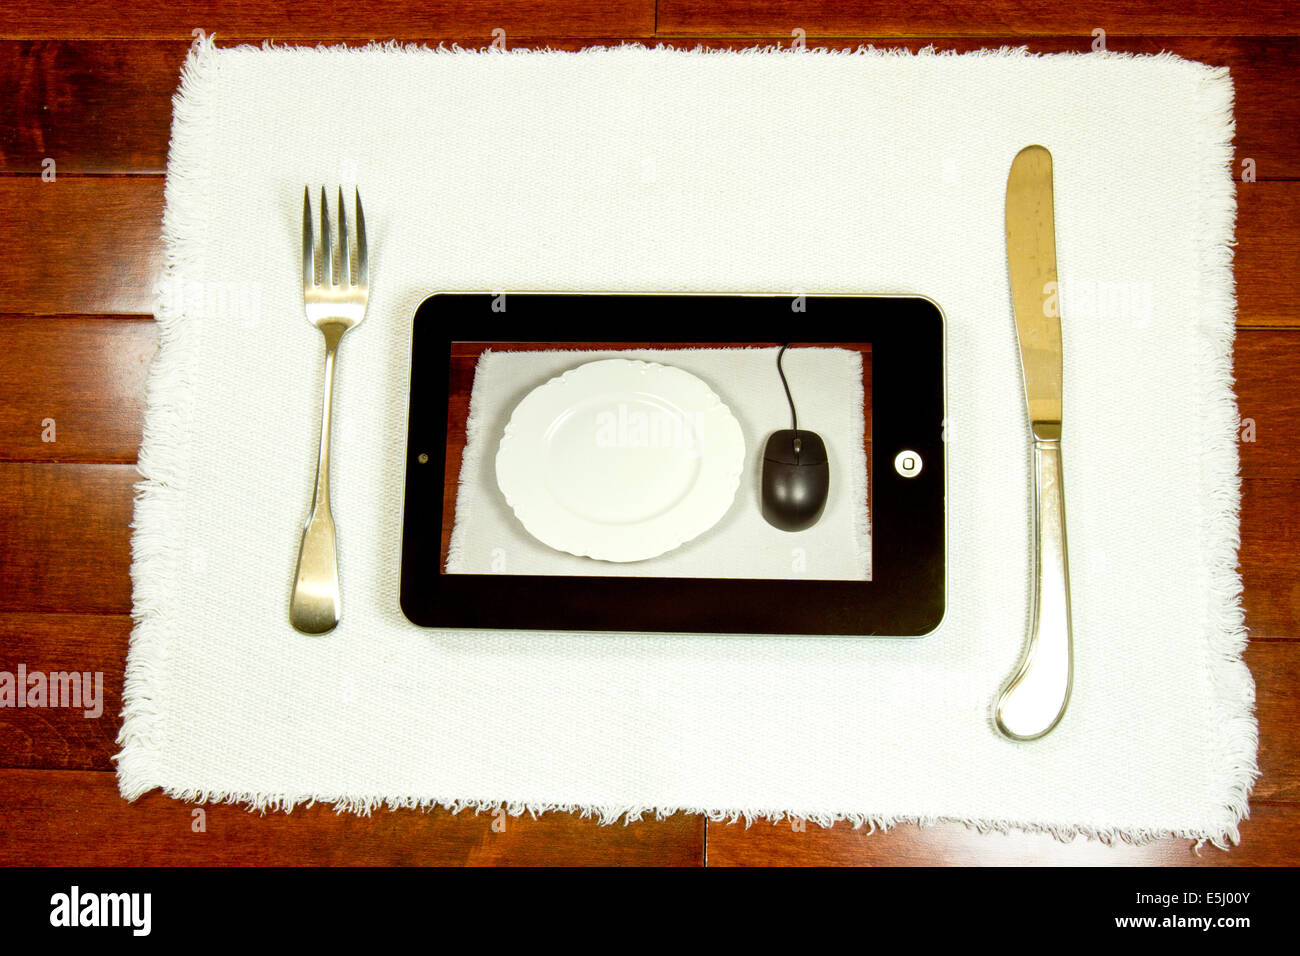 Place mat with knife, fork, plate and computer tablet representing internet restaurant review, ordering or reservations Stock Photo